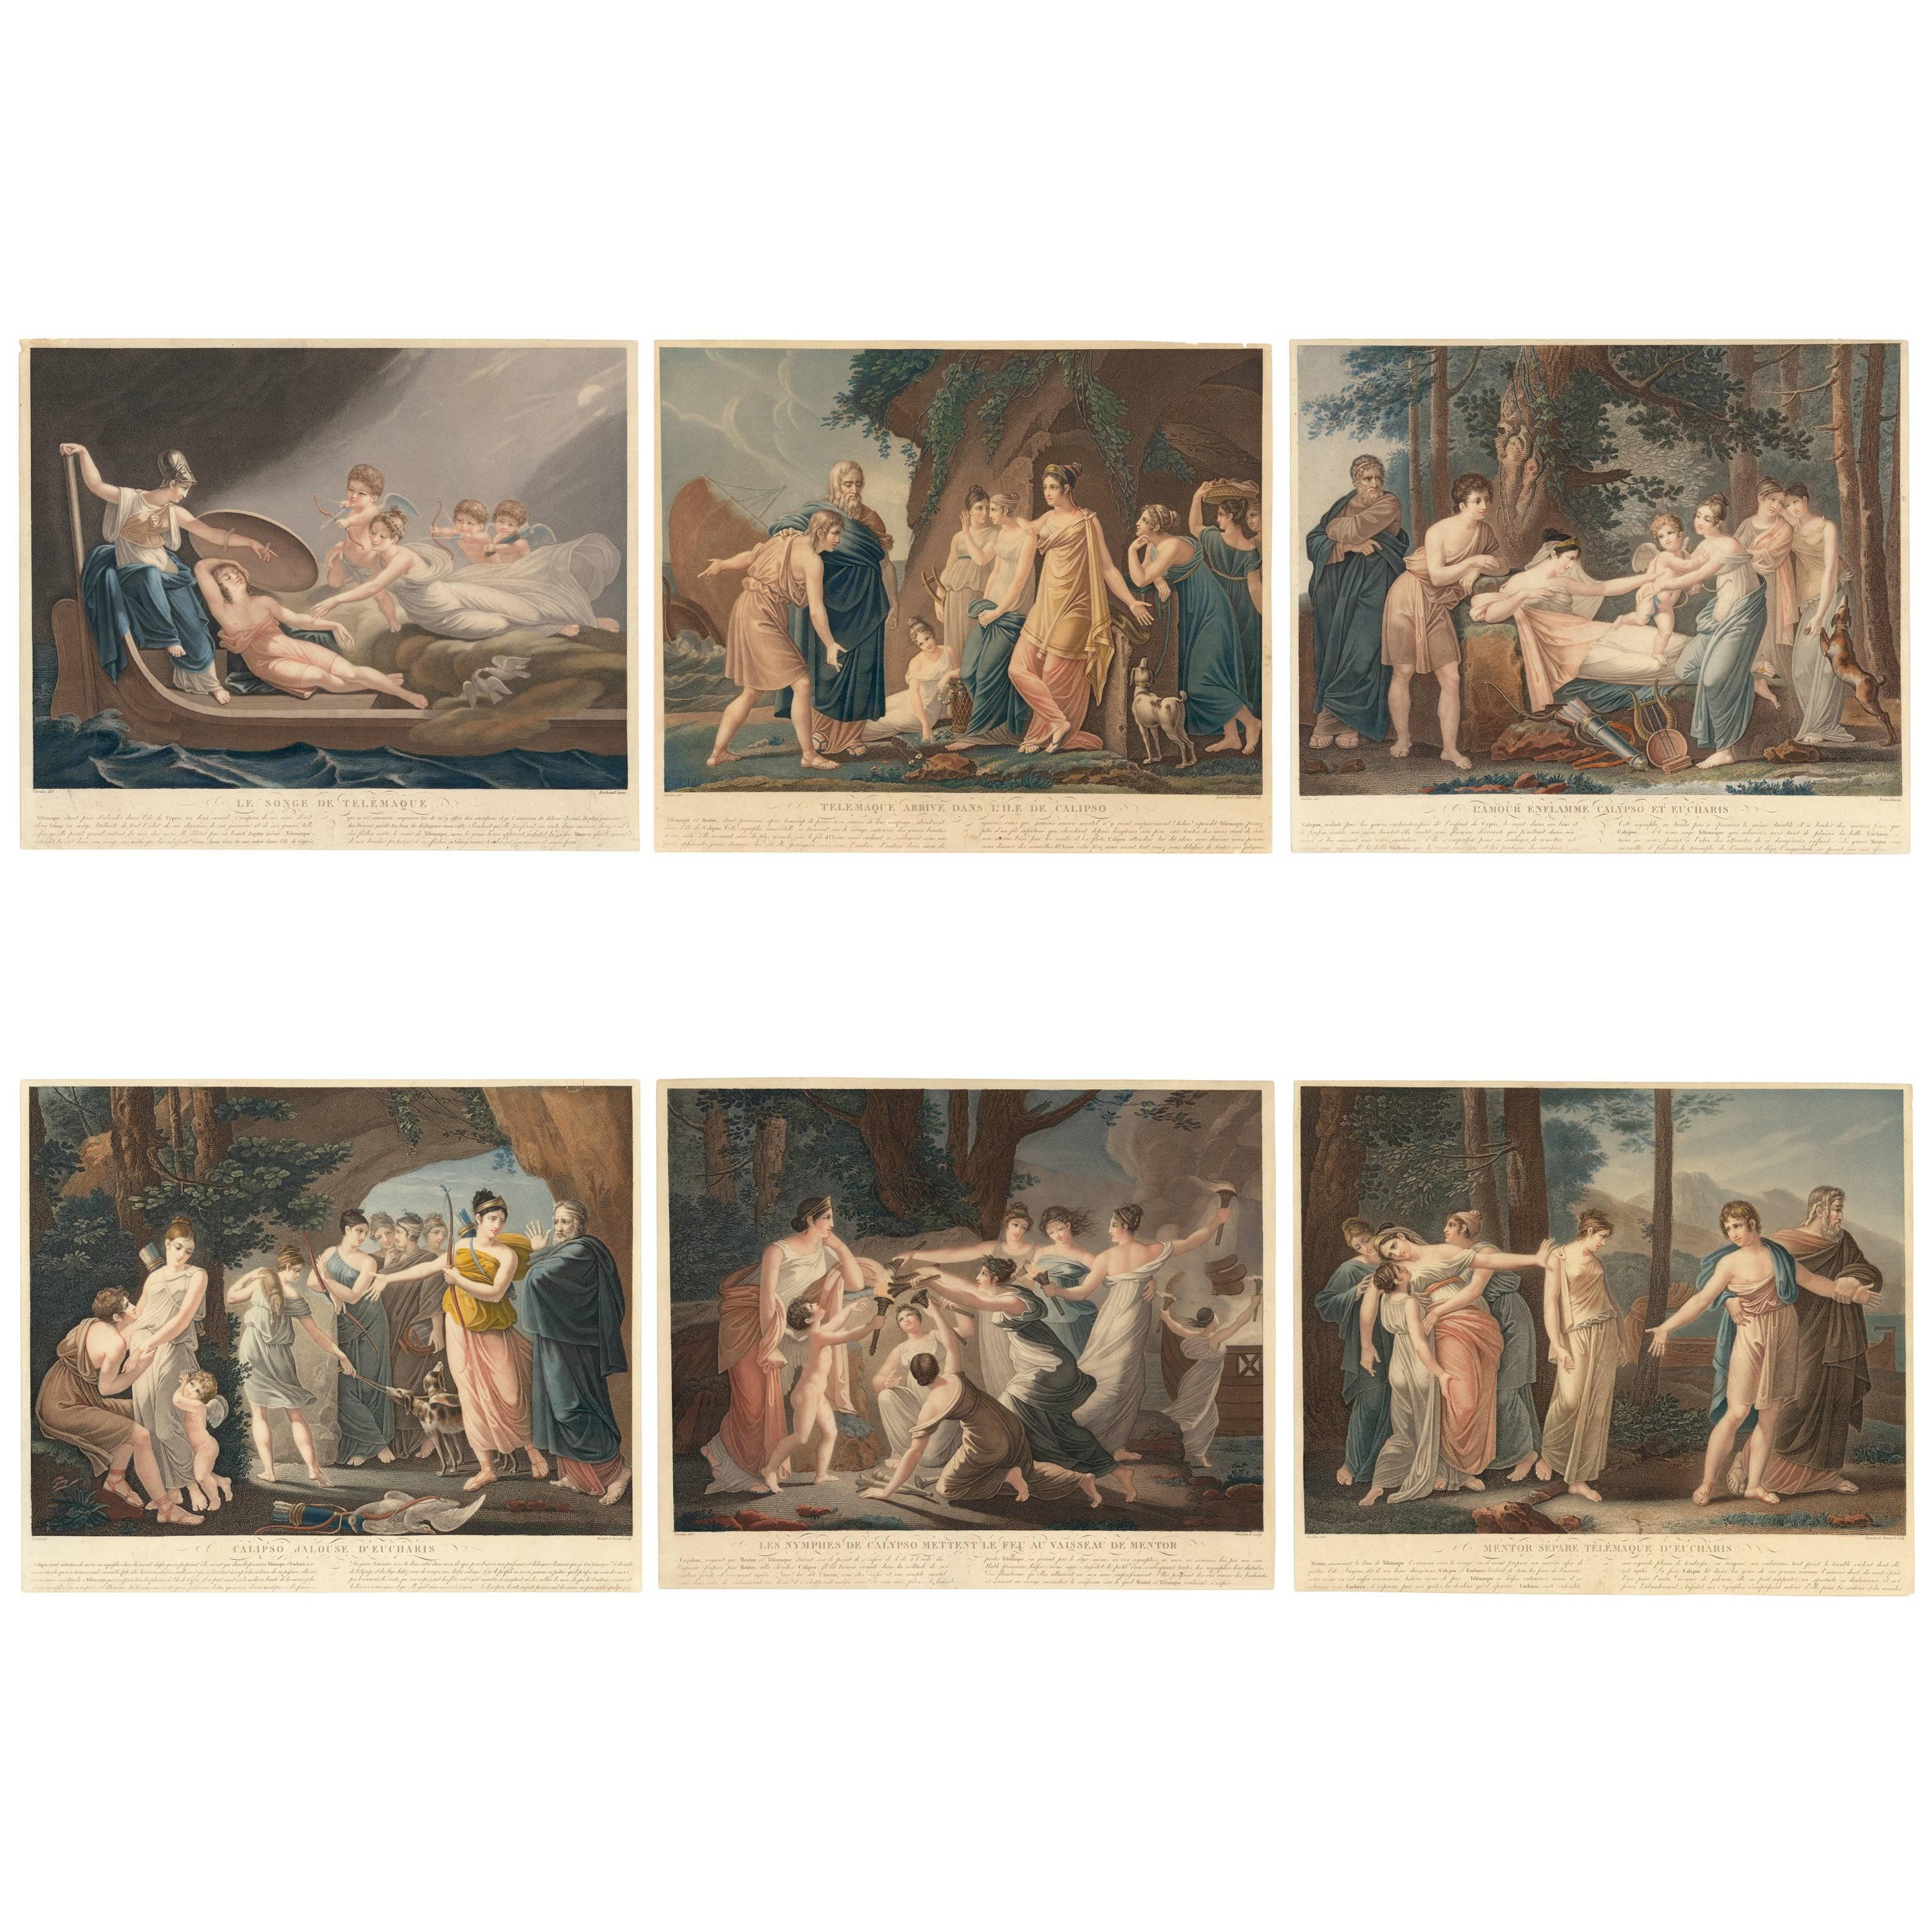 "The Adventures of Telemachus, " Set of Six Color Engravings - Print by Pierre-Jérôme Lordon